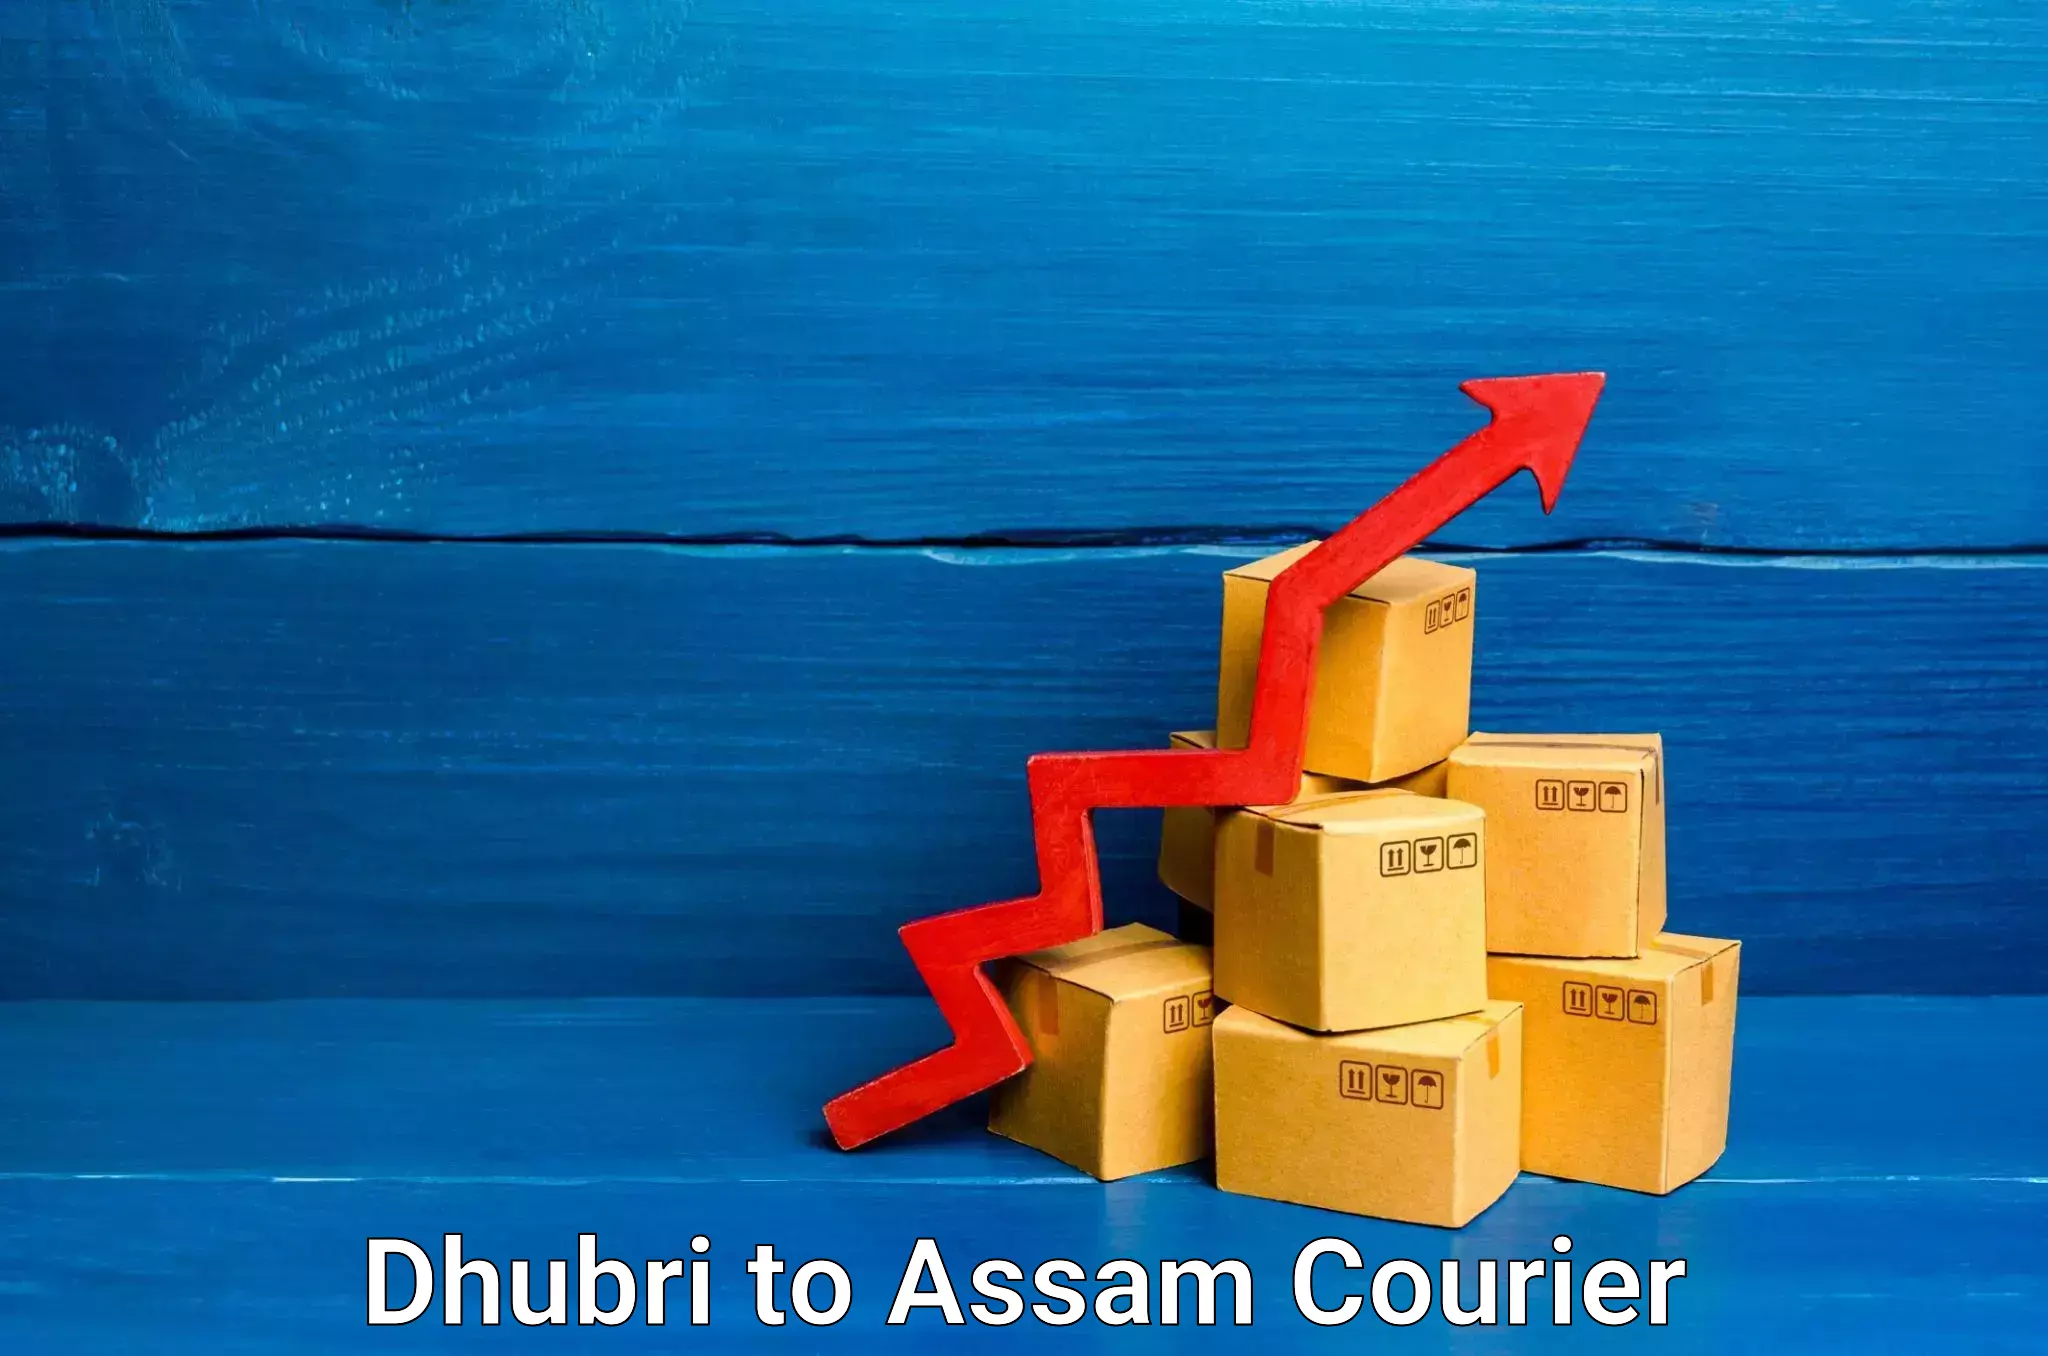 State-of-the-art courier technology Dhubri to Dhupdhara